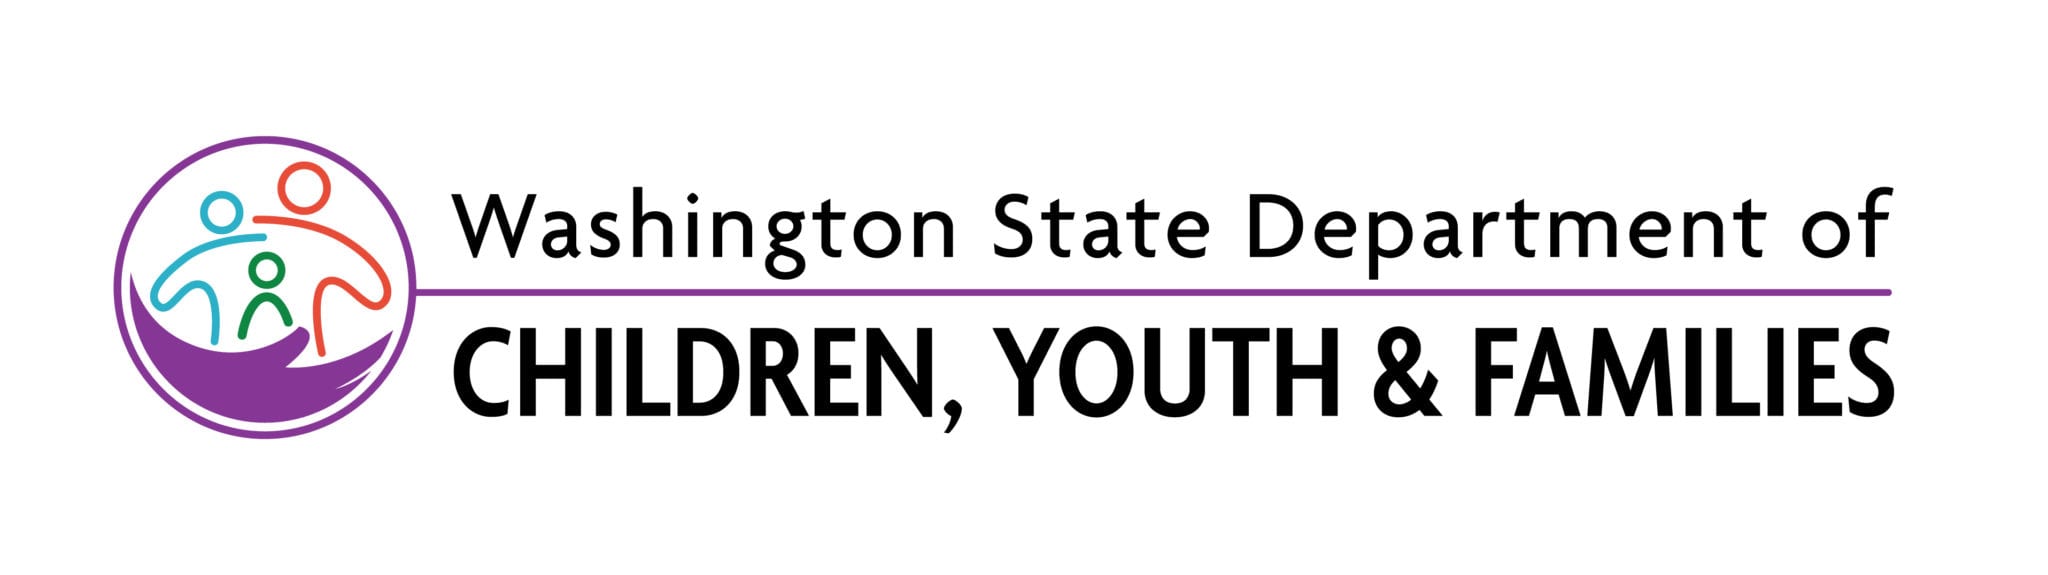 Washington State Department of Children, Youth & Families 